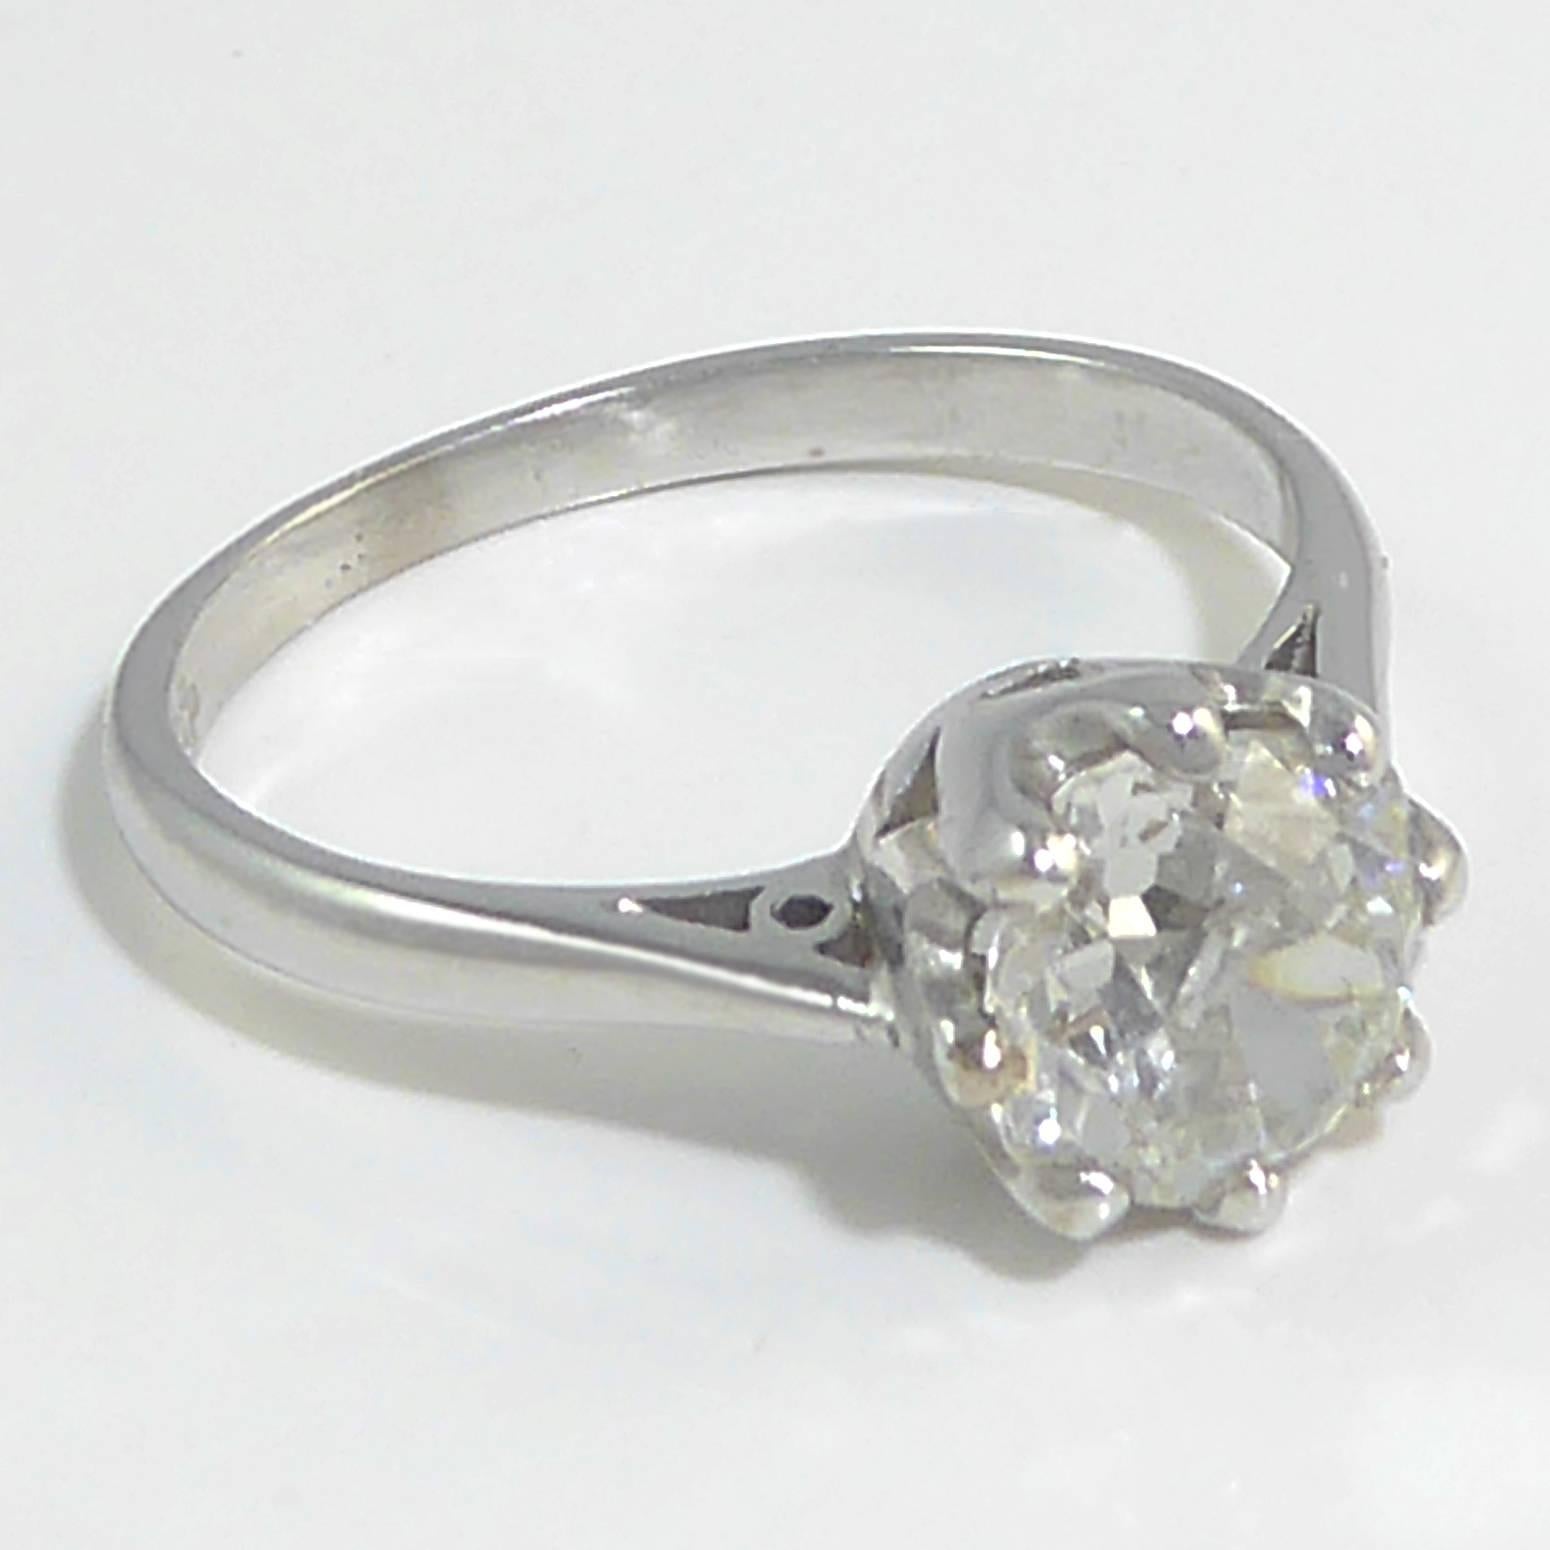 A diamond set single stone ring comprising an old European cut diamond, 1.72ct and measurig 7.73 to 7.84mm diameter.  The diamond is accompanied by a certificate issued by EGL International (report no. 2360234626) stating the diamond weight of